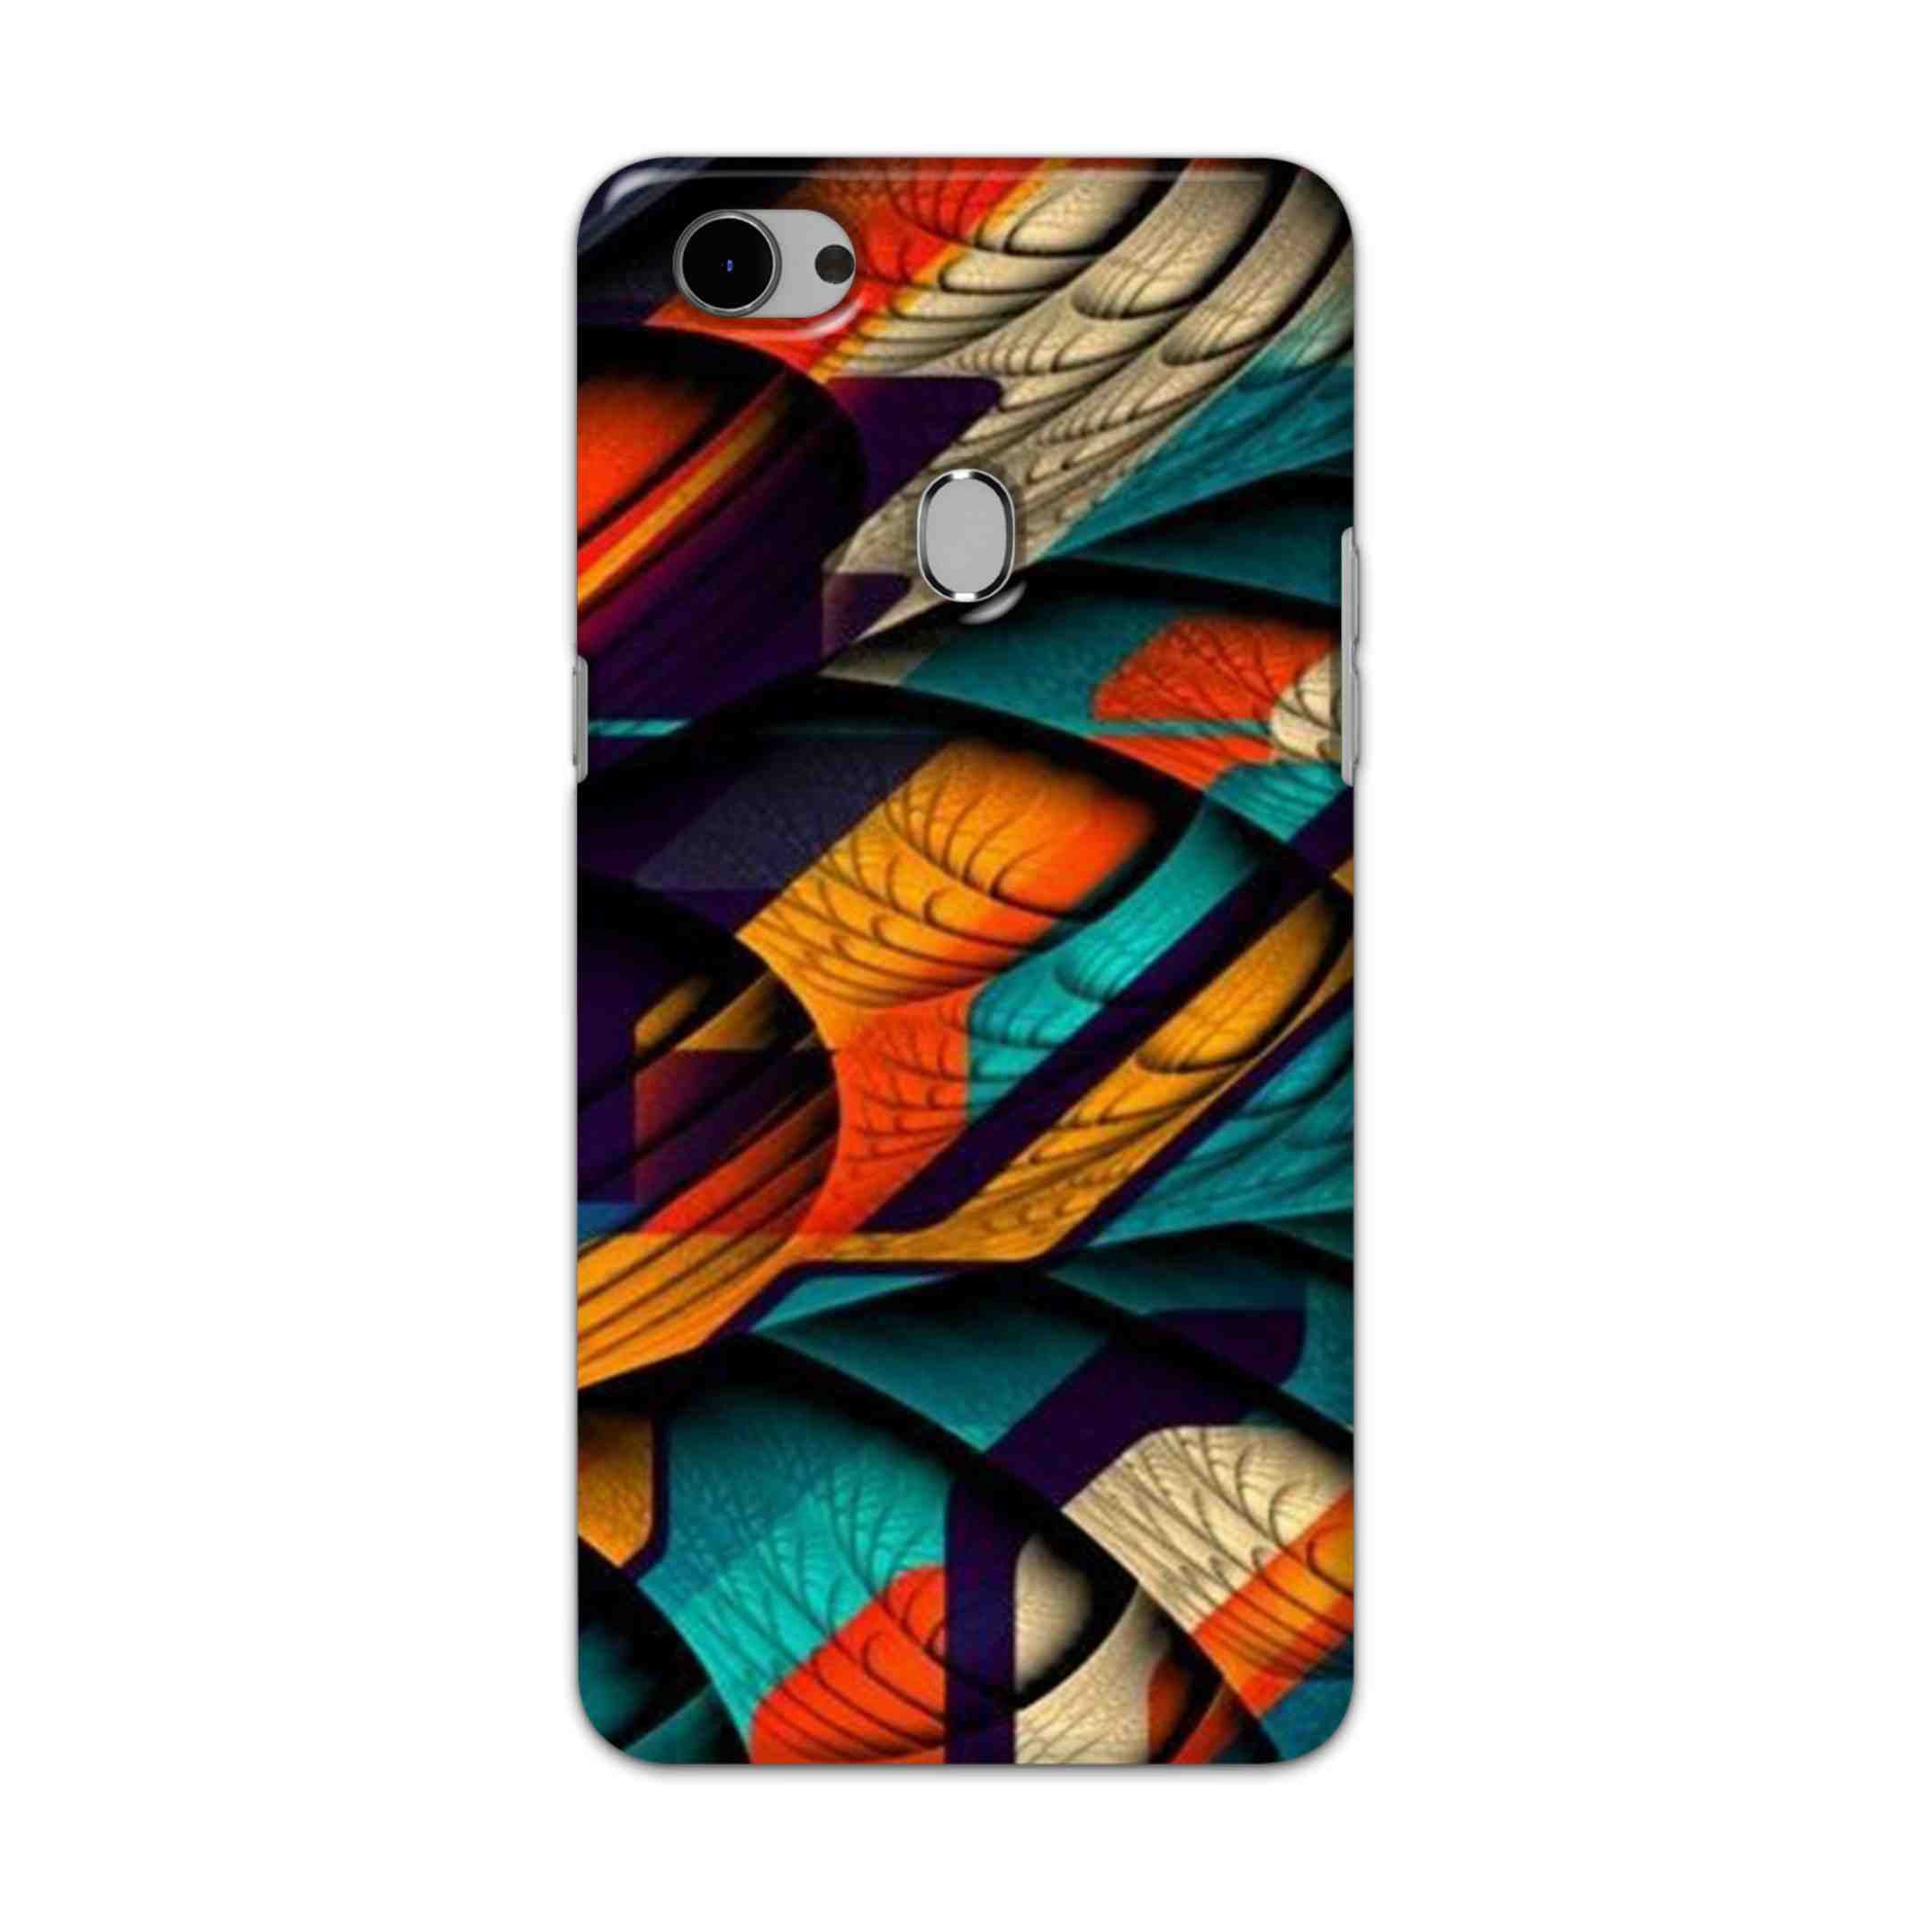 Buy Colour Abstract Hard Back Mobile Phone Case Cover For Oppo F7 Online